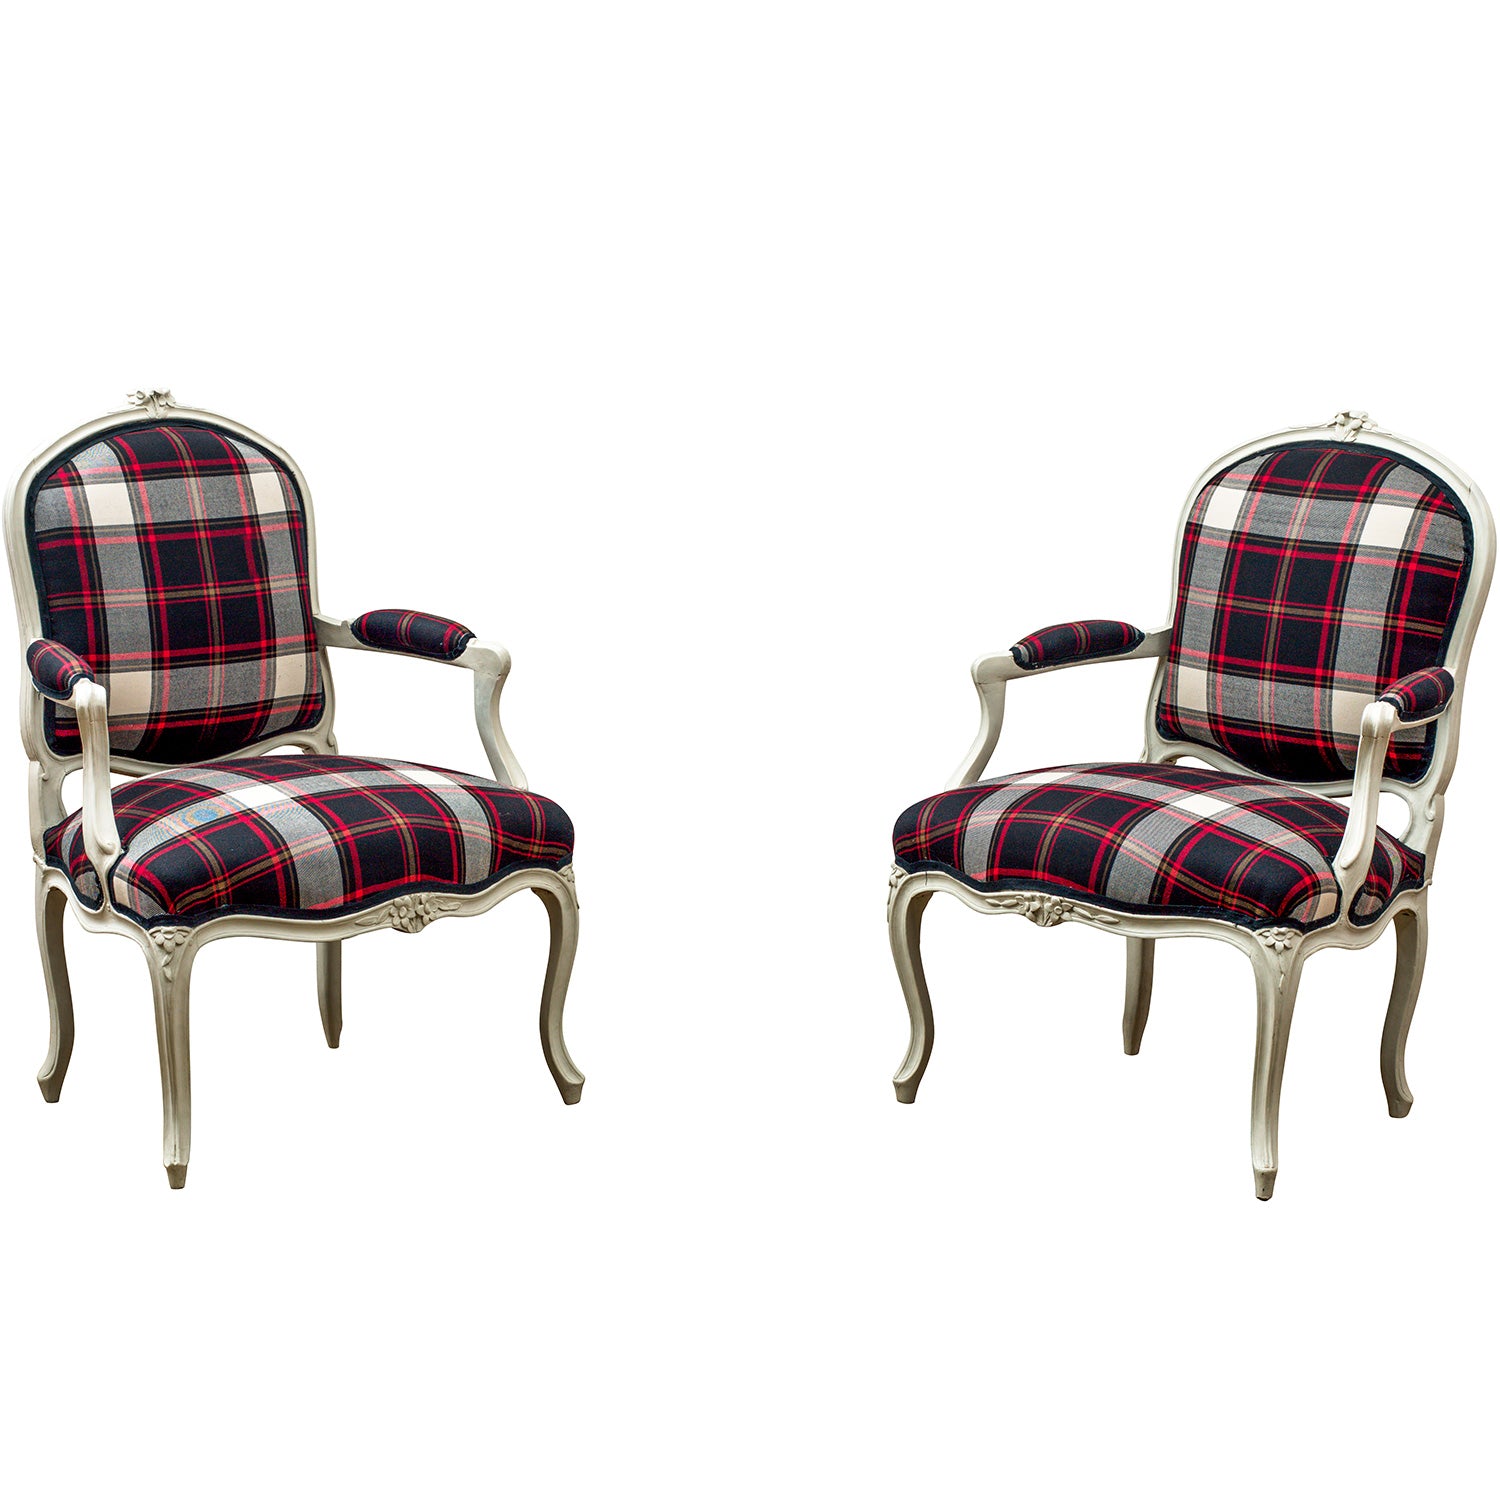 A Pair of French Louis XV Period Off-White Painted Armchairs